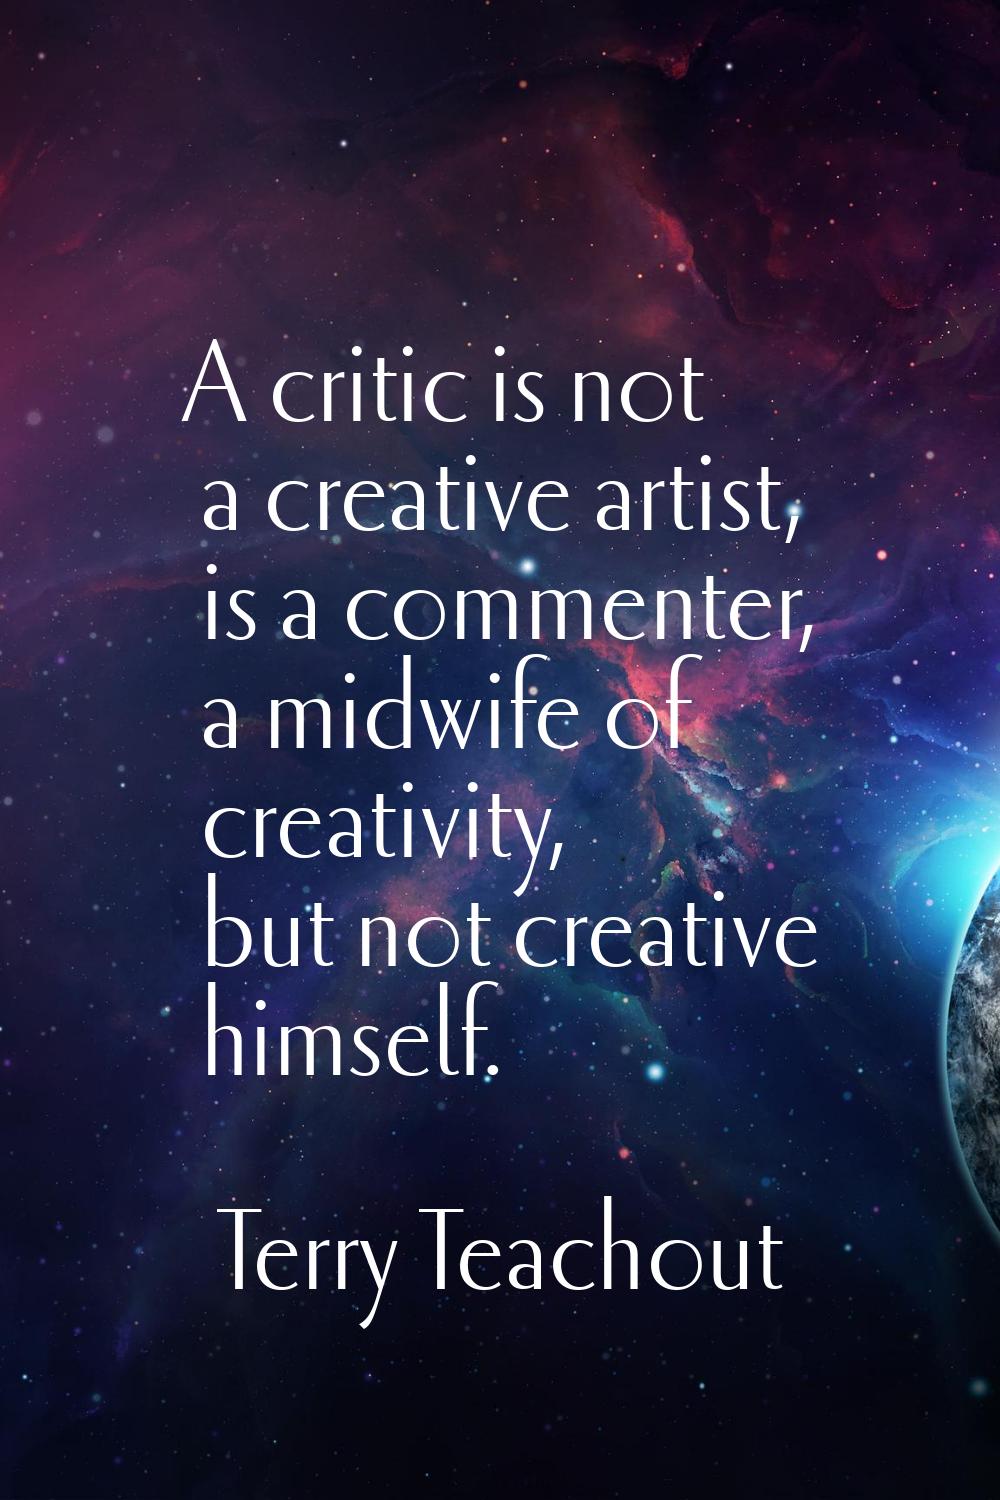 A critic is not a creative artist, is a commenter, a midwife of creativity, but not creative himsel